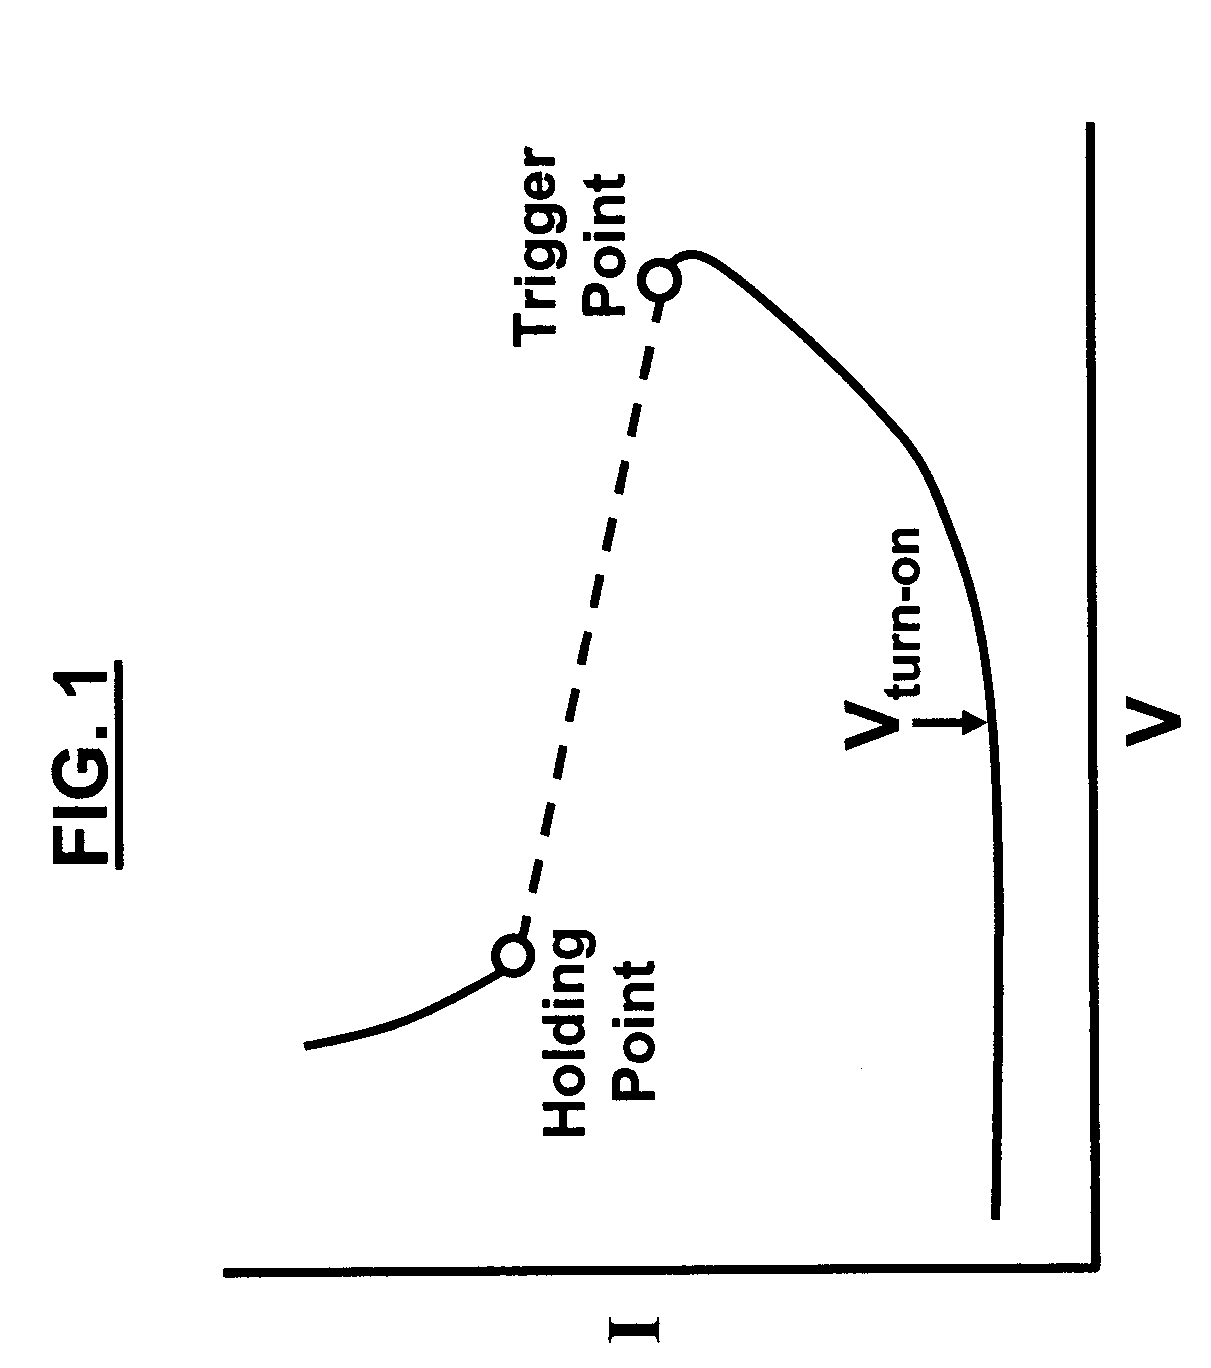 Structure and method for latchup suppression utilizing trench and masked sub-collector implantation